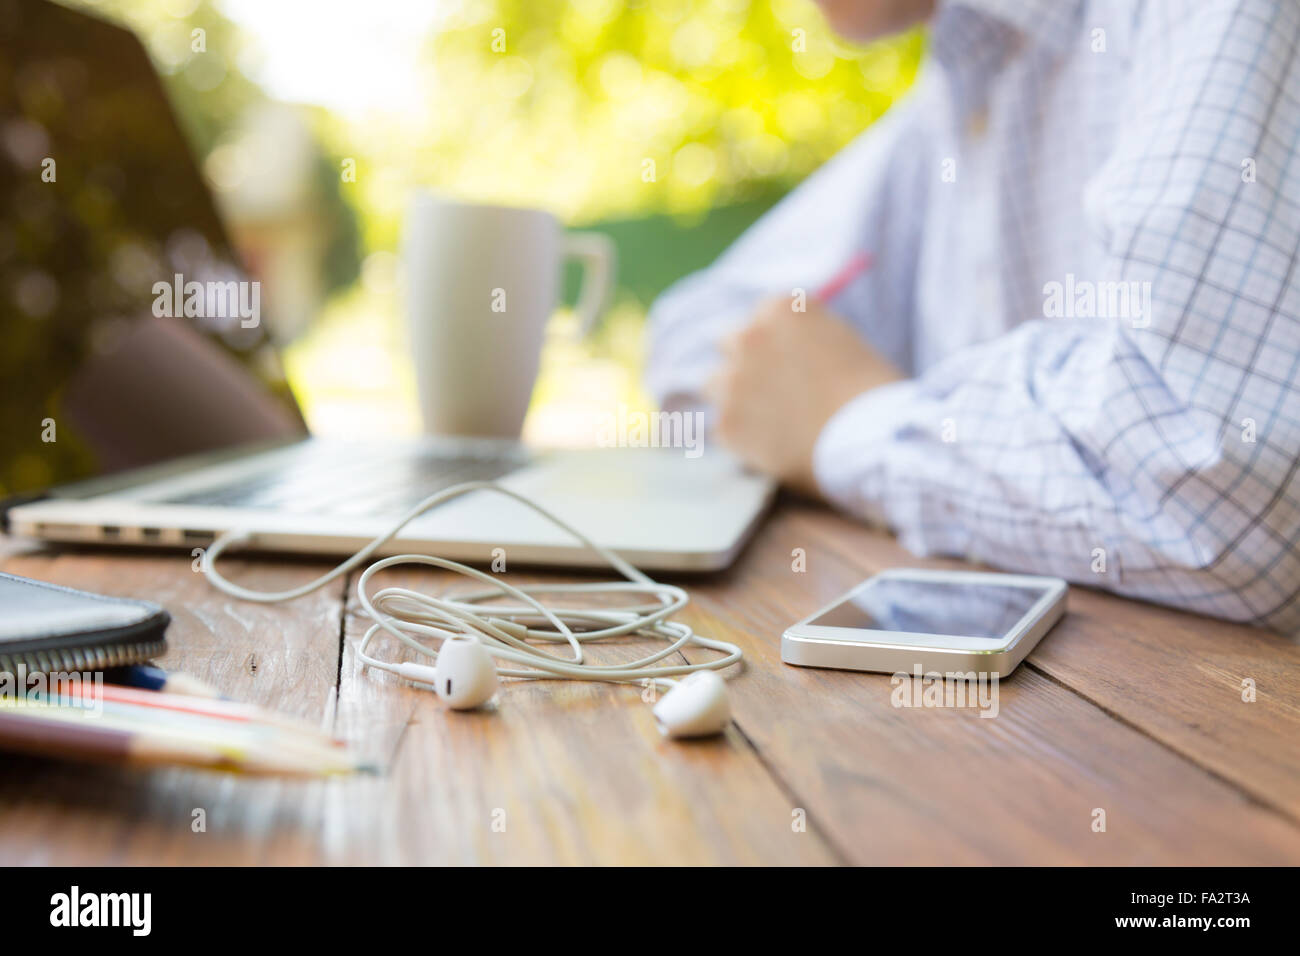 Escaped of office man sitting at natural country style wooden desk with electronic gadgets Stock Photo